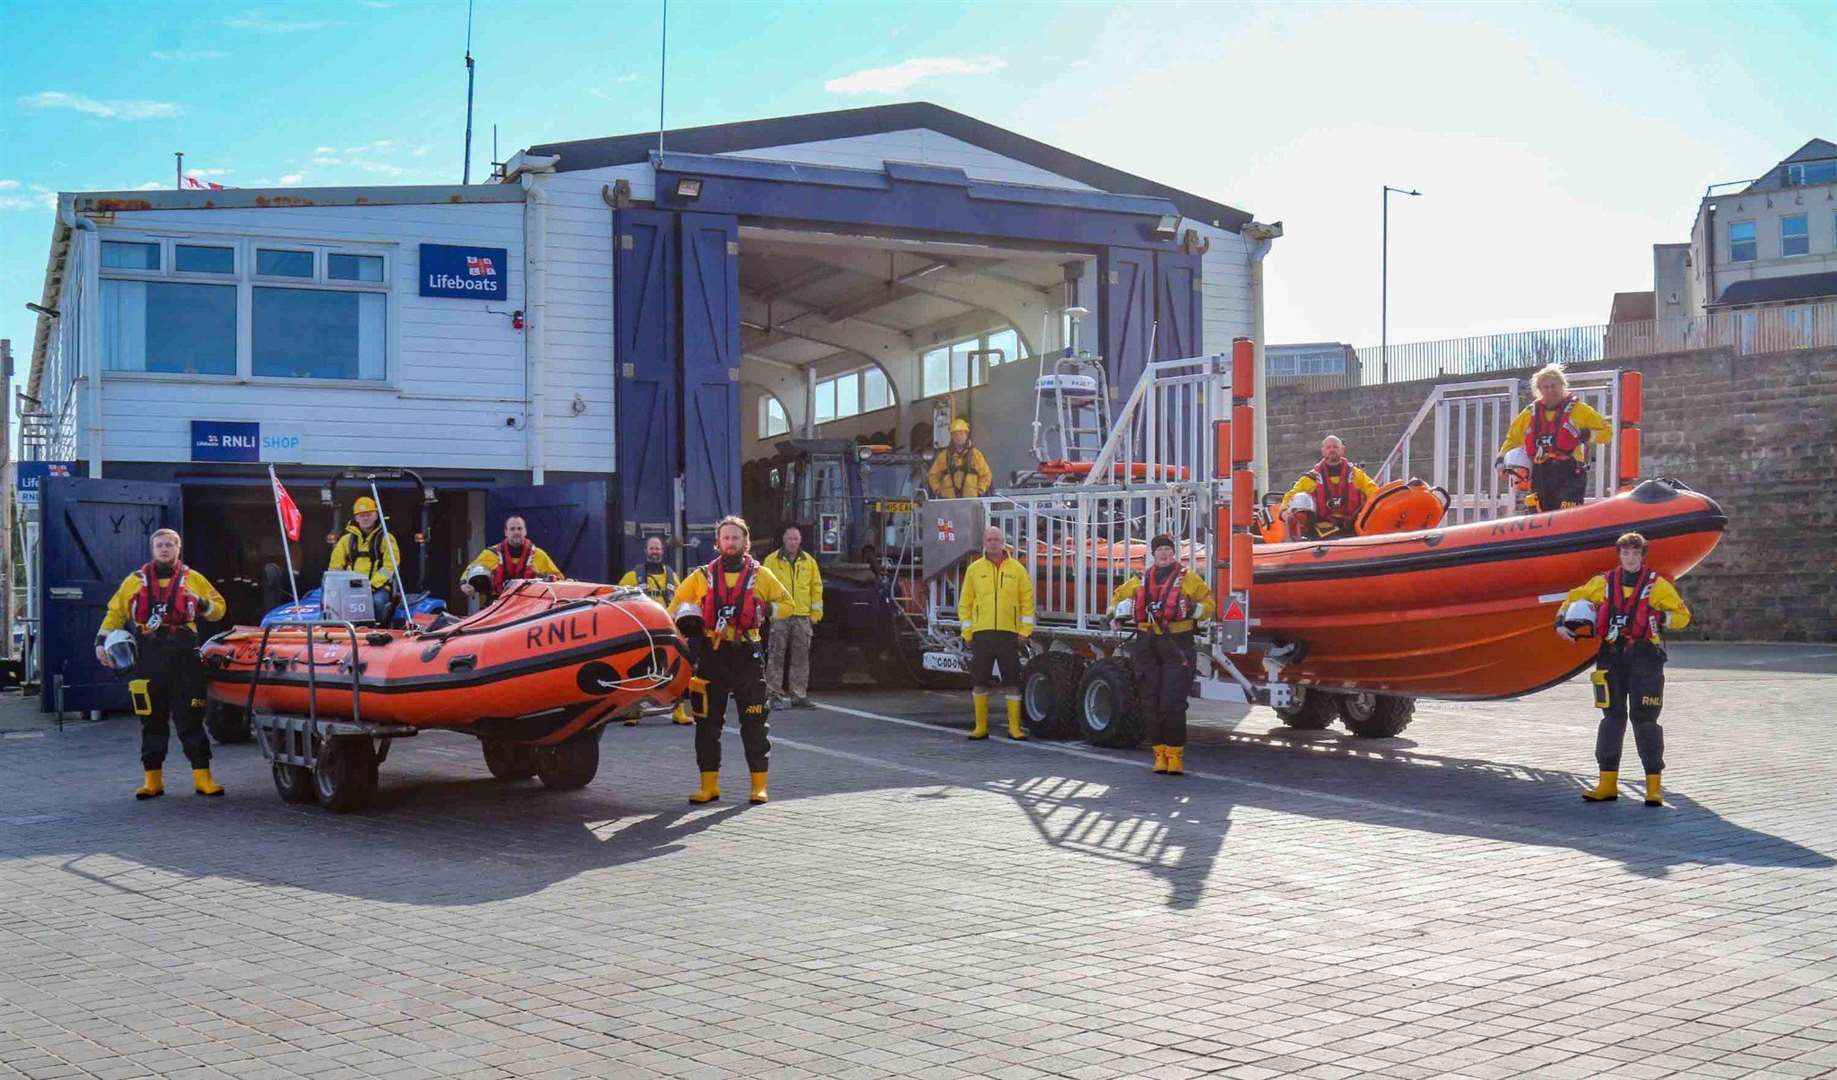 Margate RNLI's B class and D class lifeboats. Picture: Margate RNLI